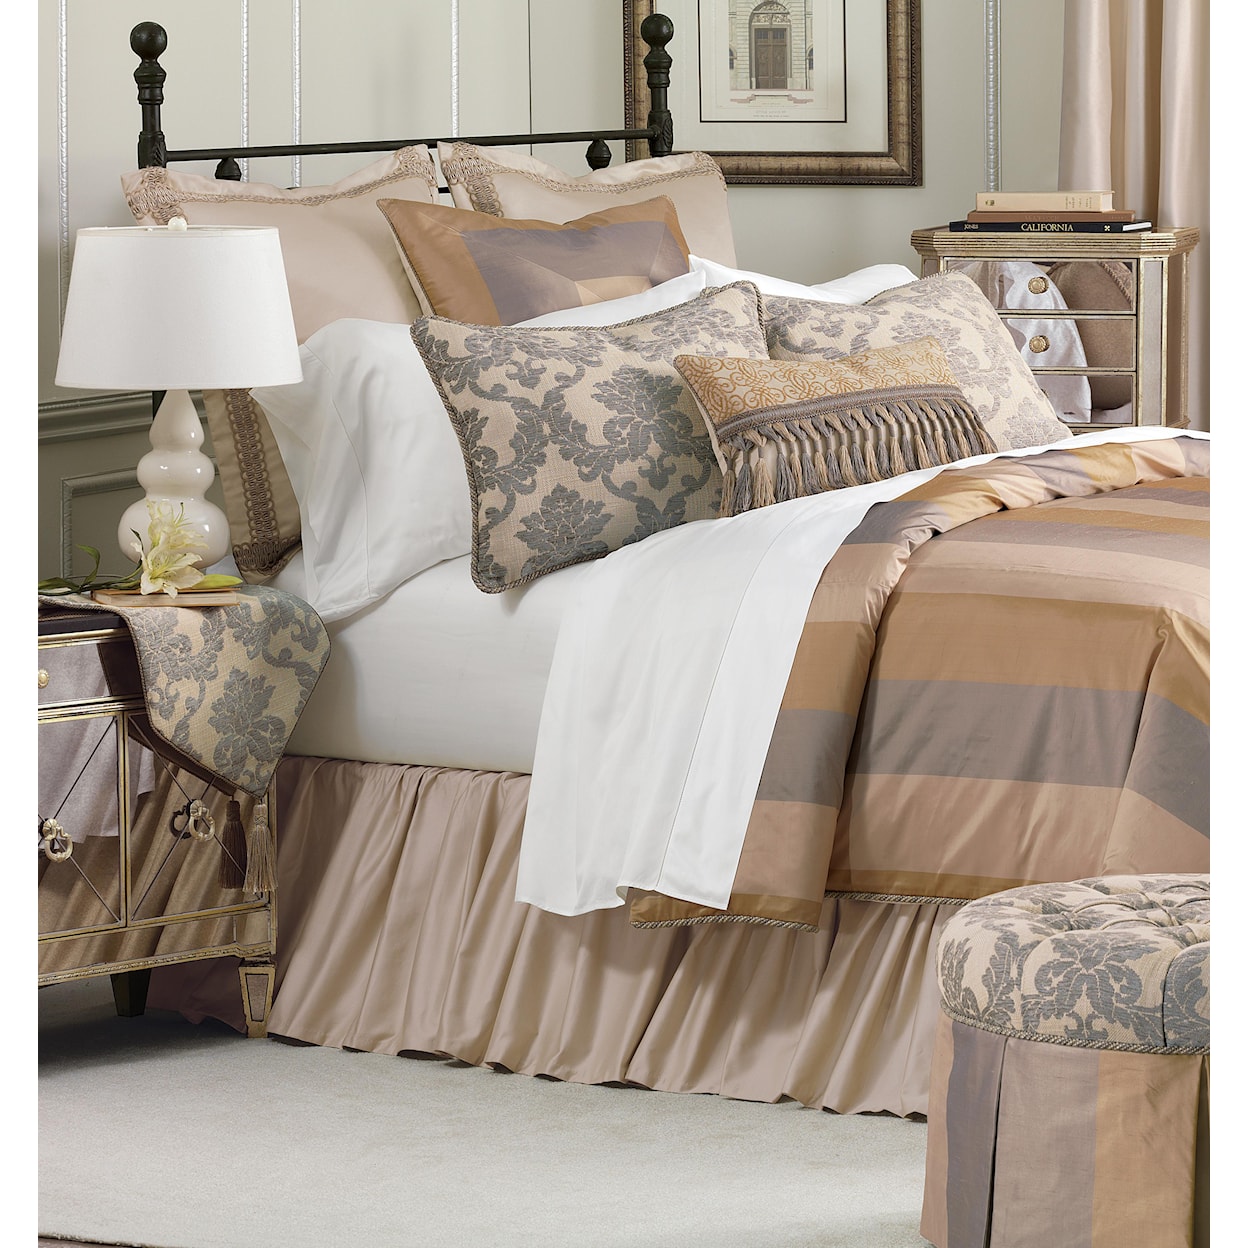 Eastern Accents Lancaster Queen Bedset